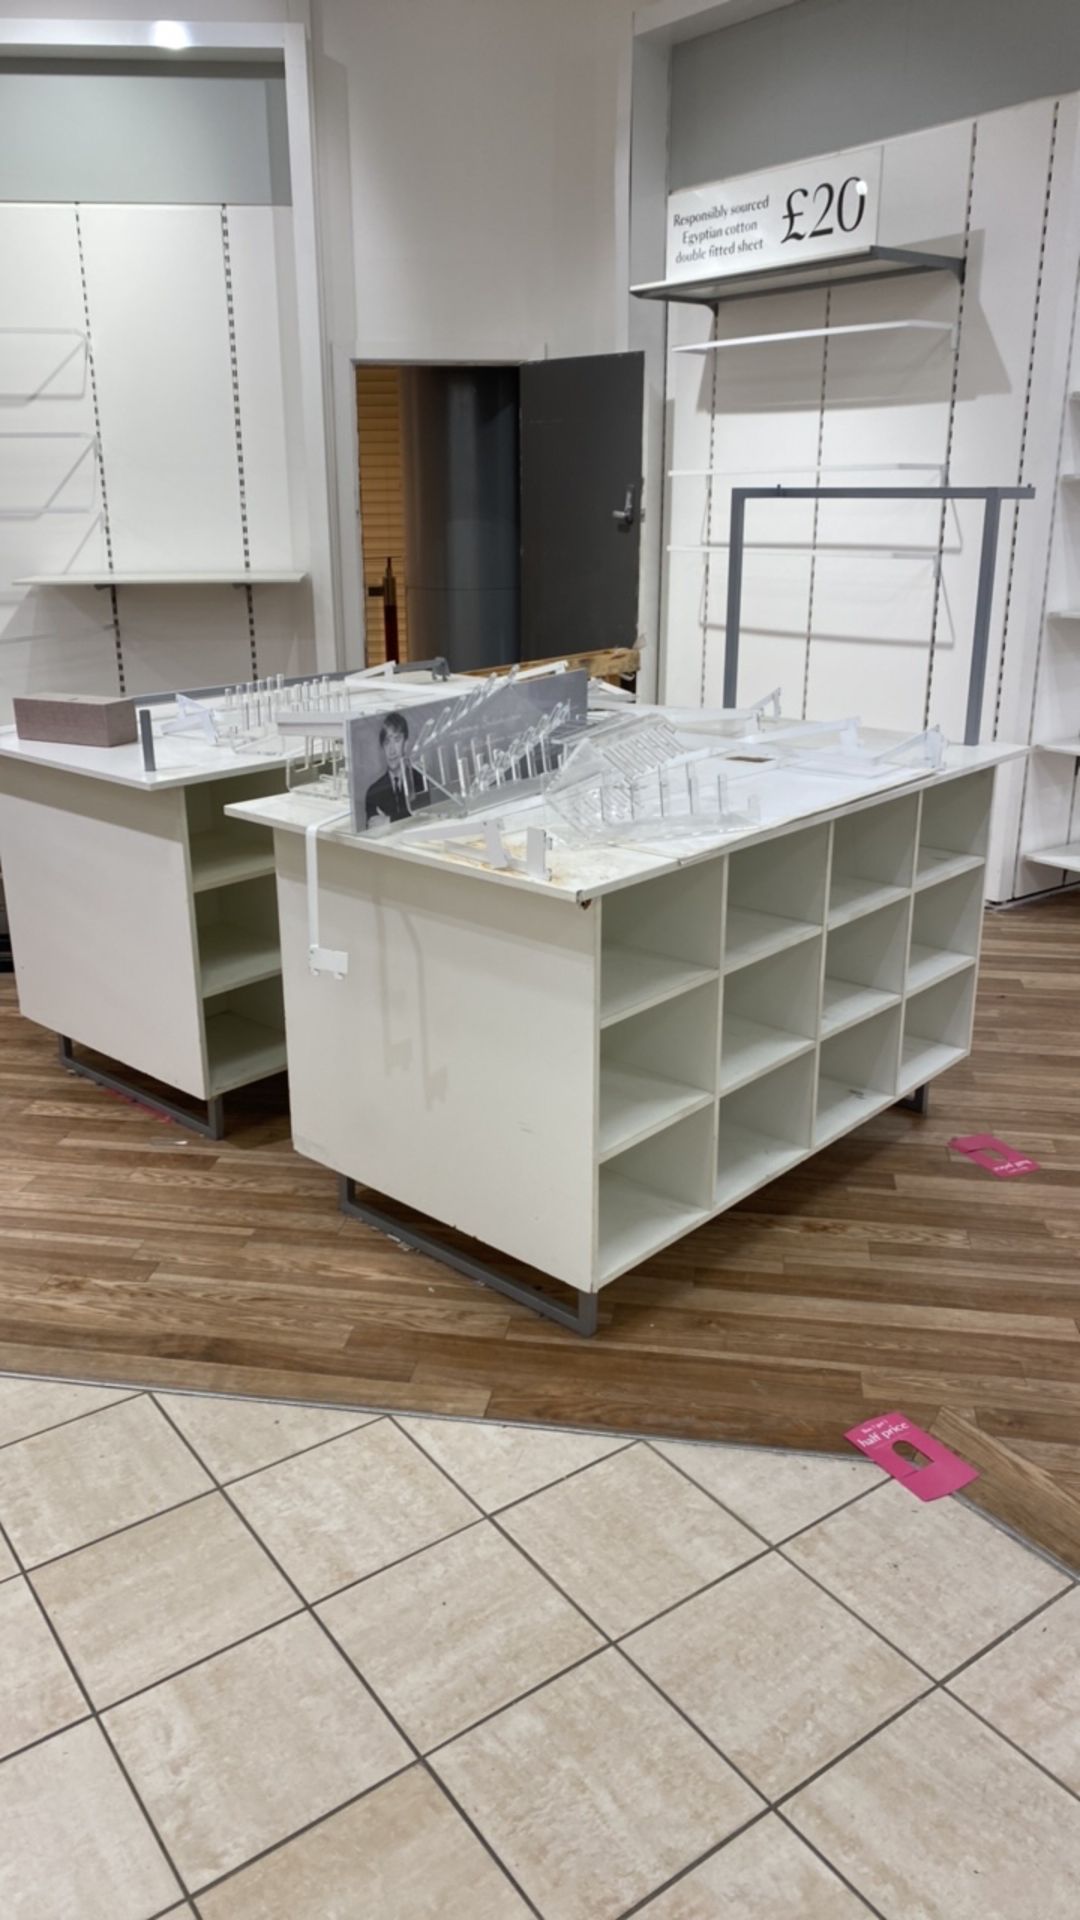 2x Retail Display White Wooden Cabinets - Image 2 of 4